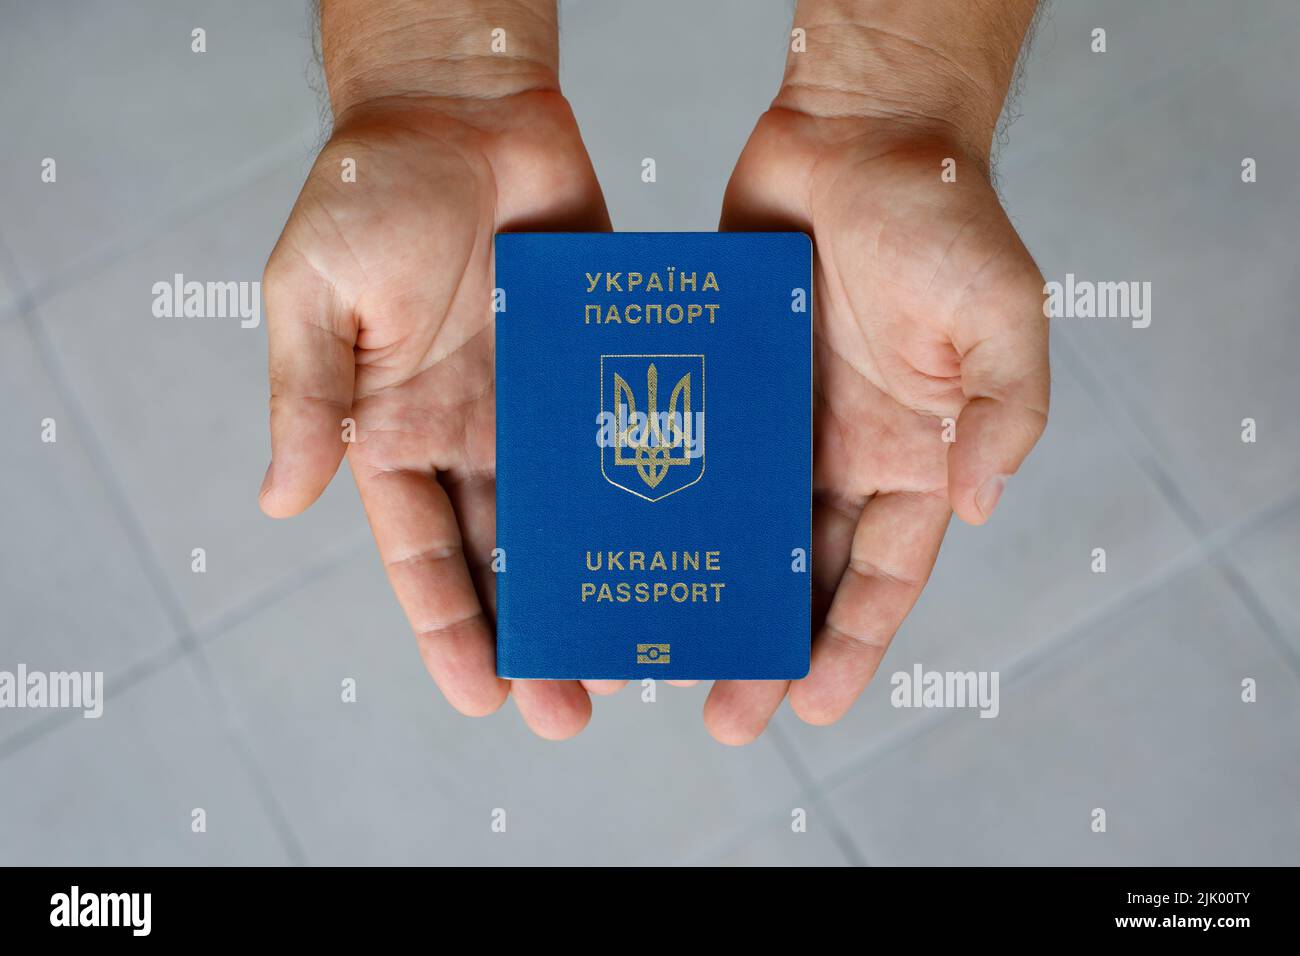 Passport of a citizen of Ukraine in a male hand on a gray background, close-up. Stock Photo